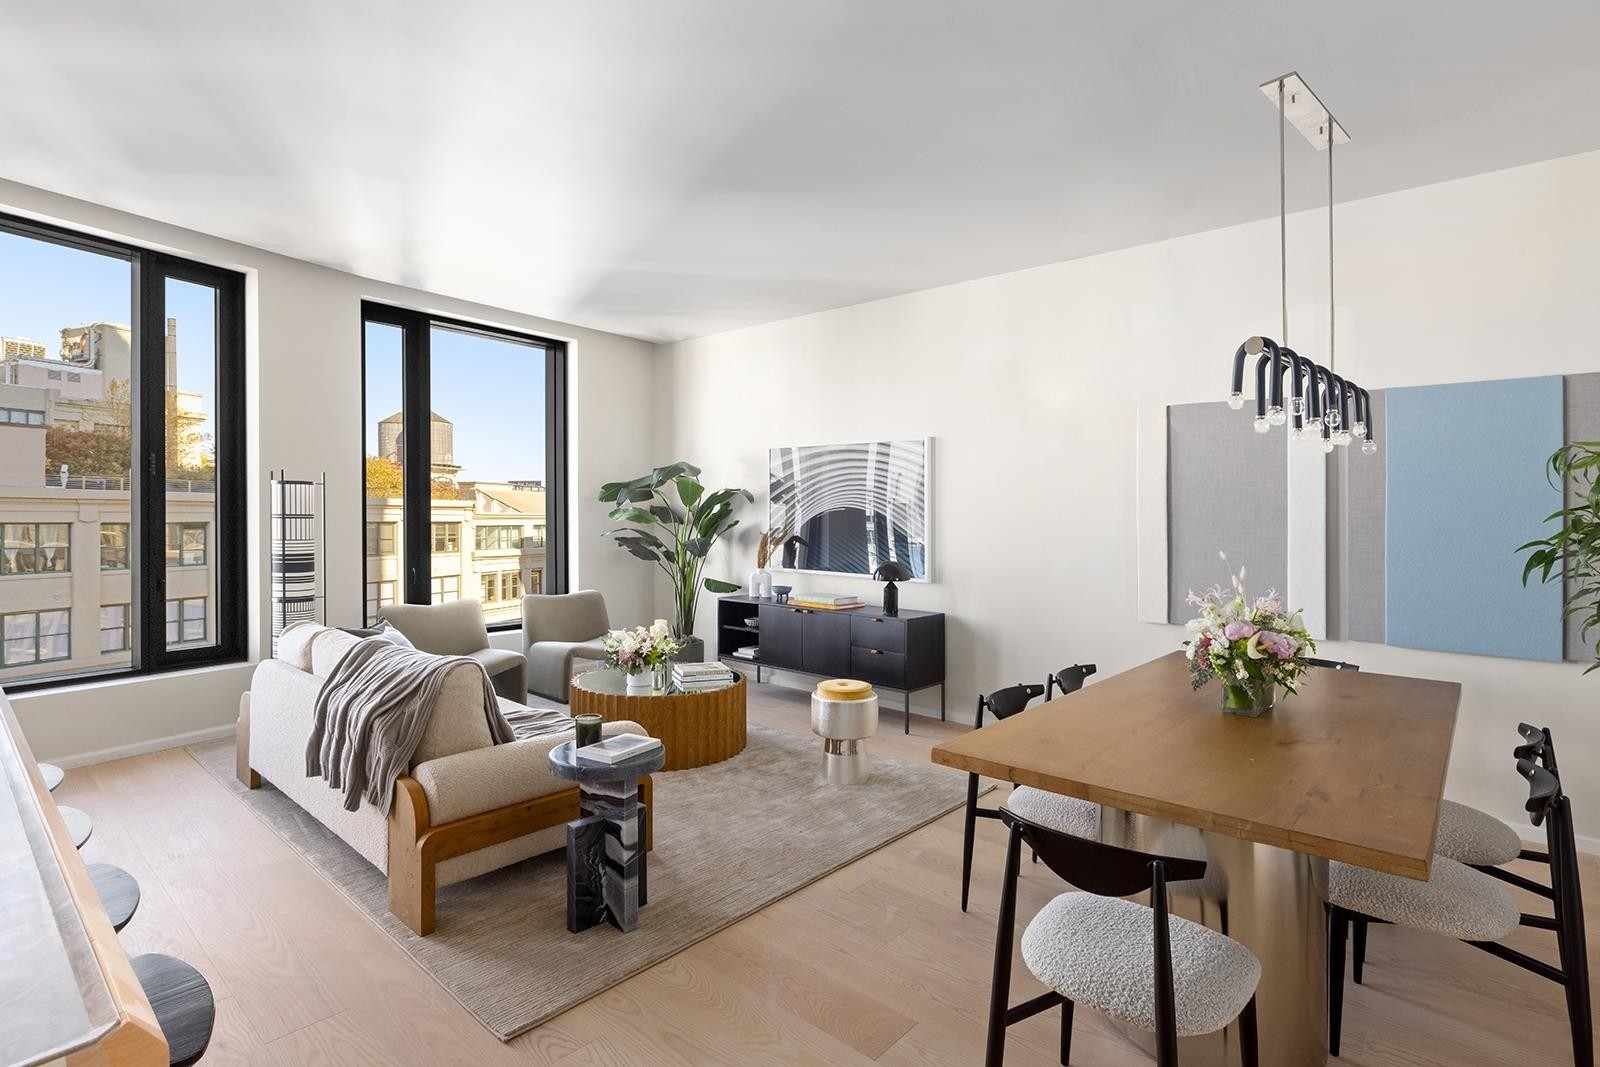 3. Condominiums for Sale at Olympia Dumbo, 30 FRONT ST, 16C Brooklyn, NY 11201